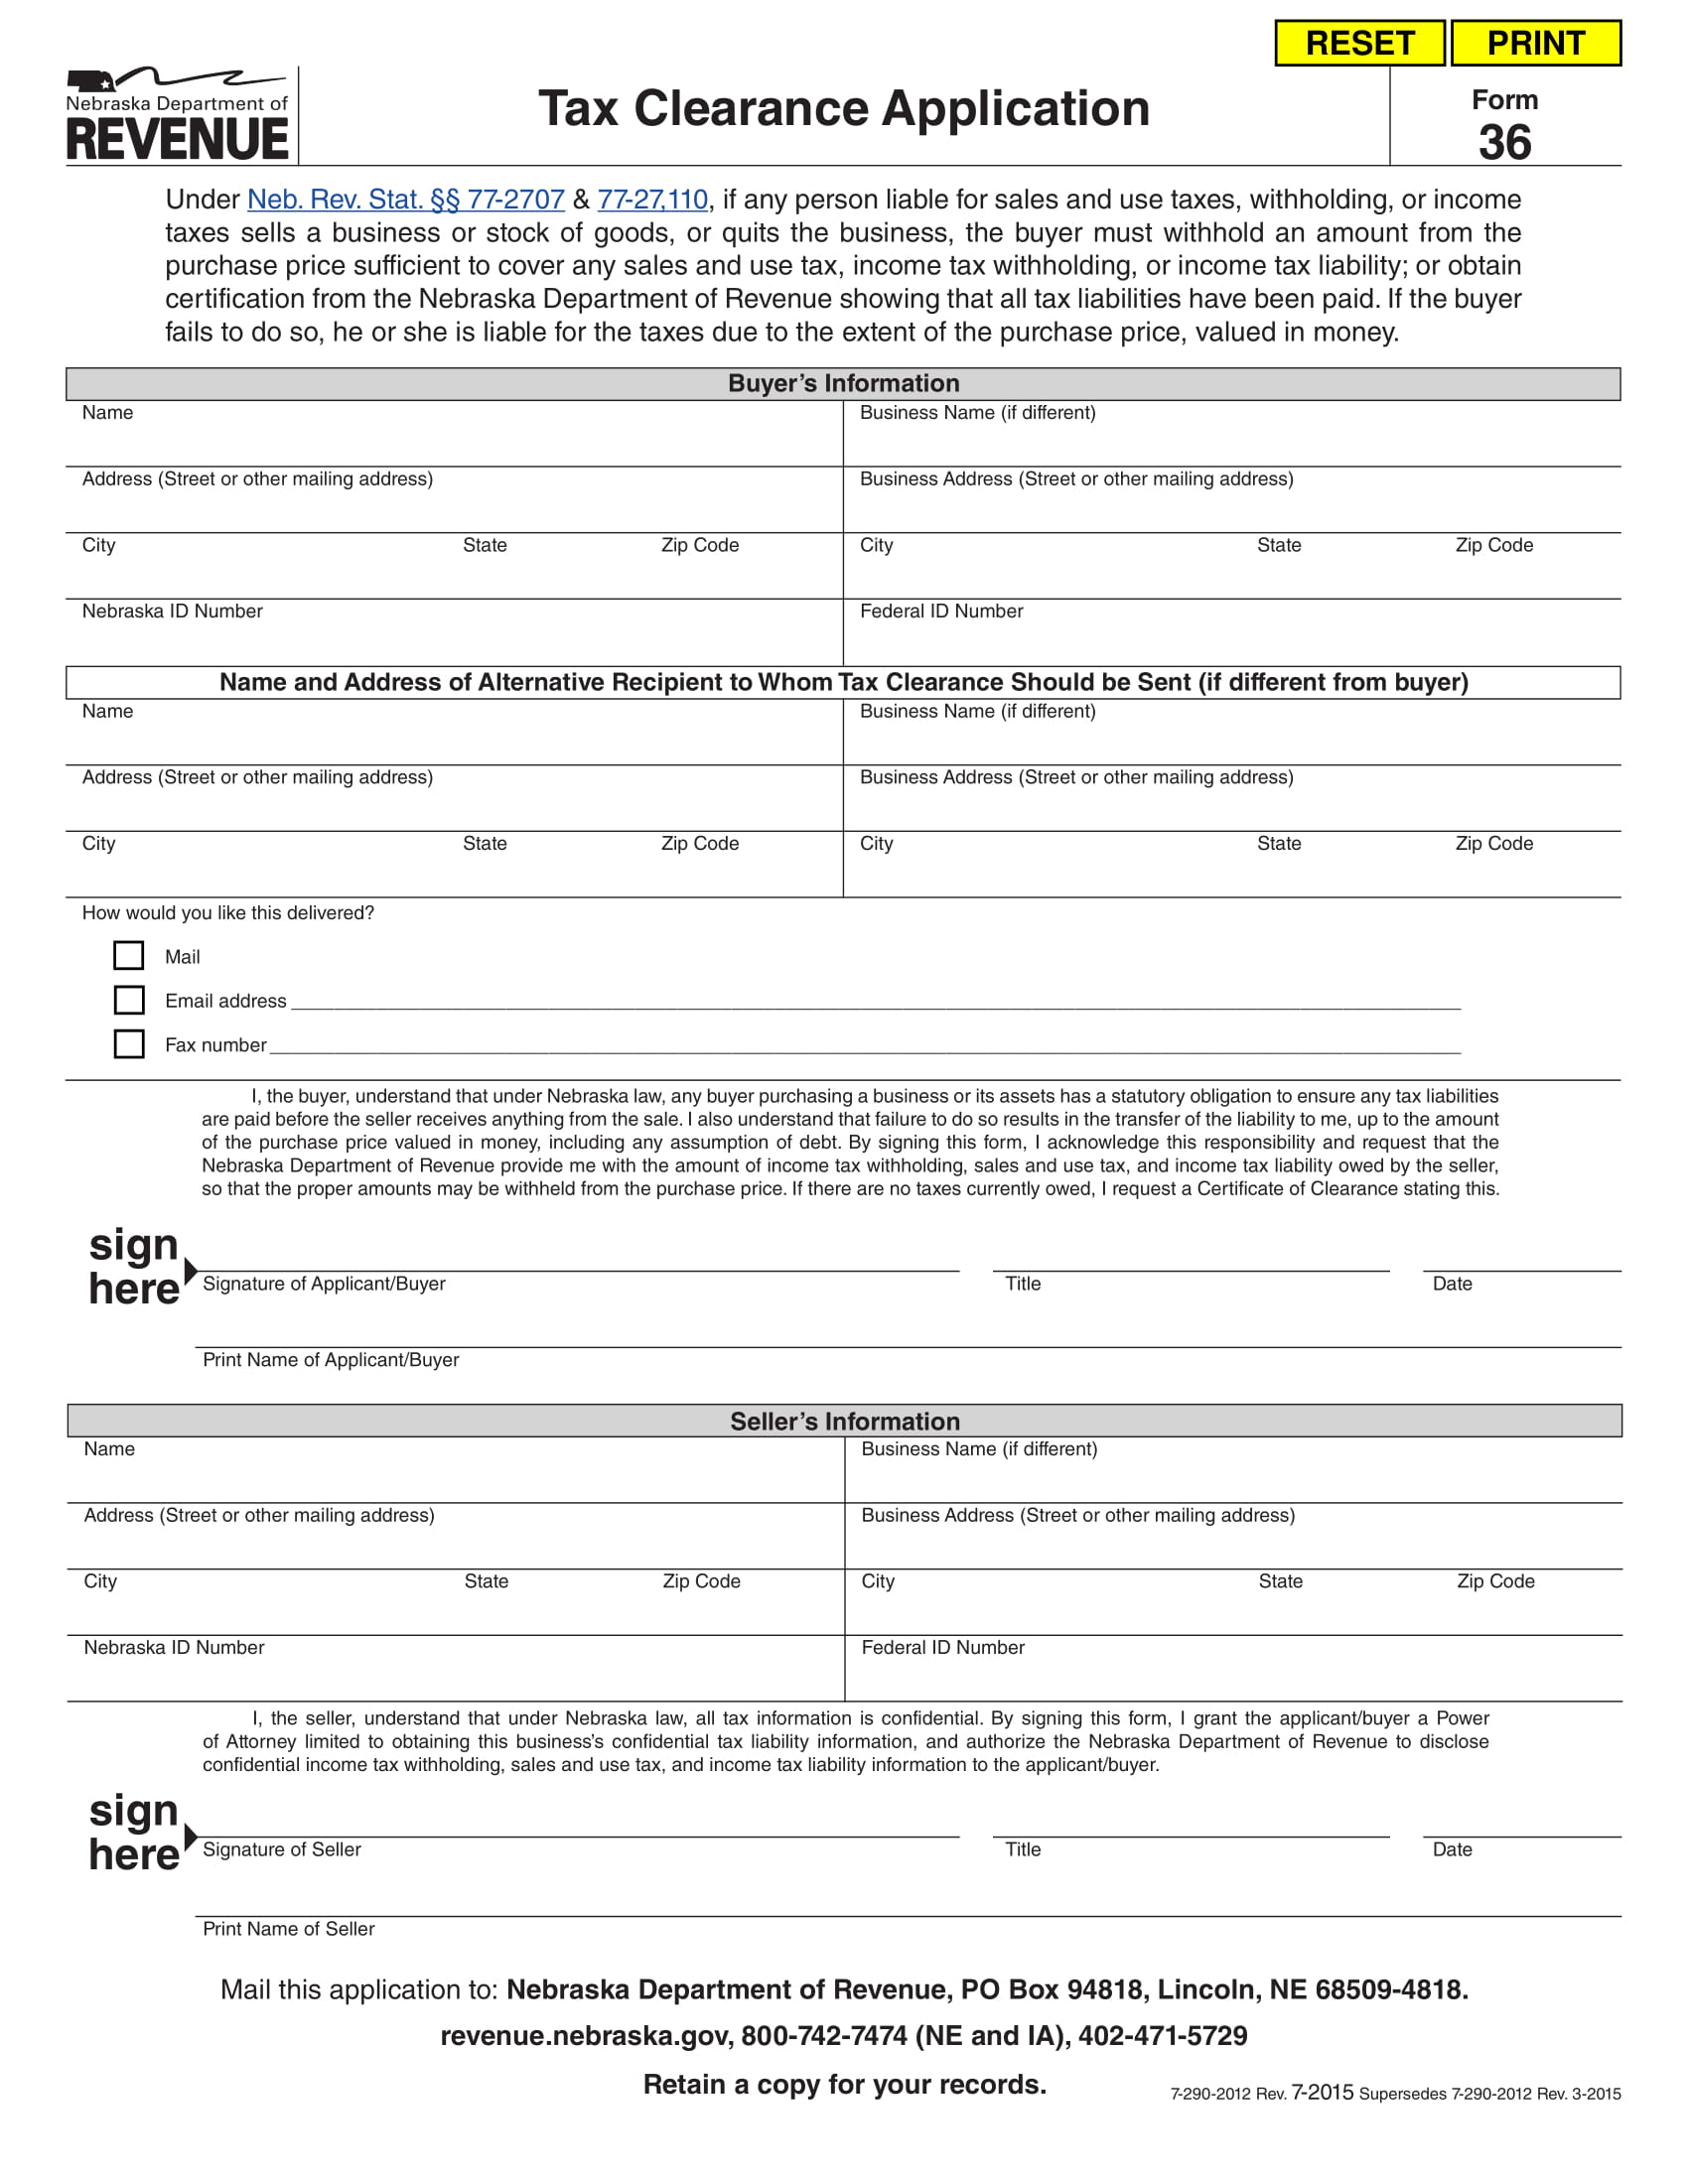 tax clearance application form 1